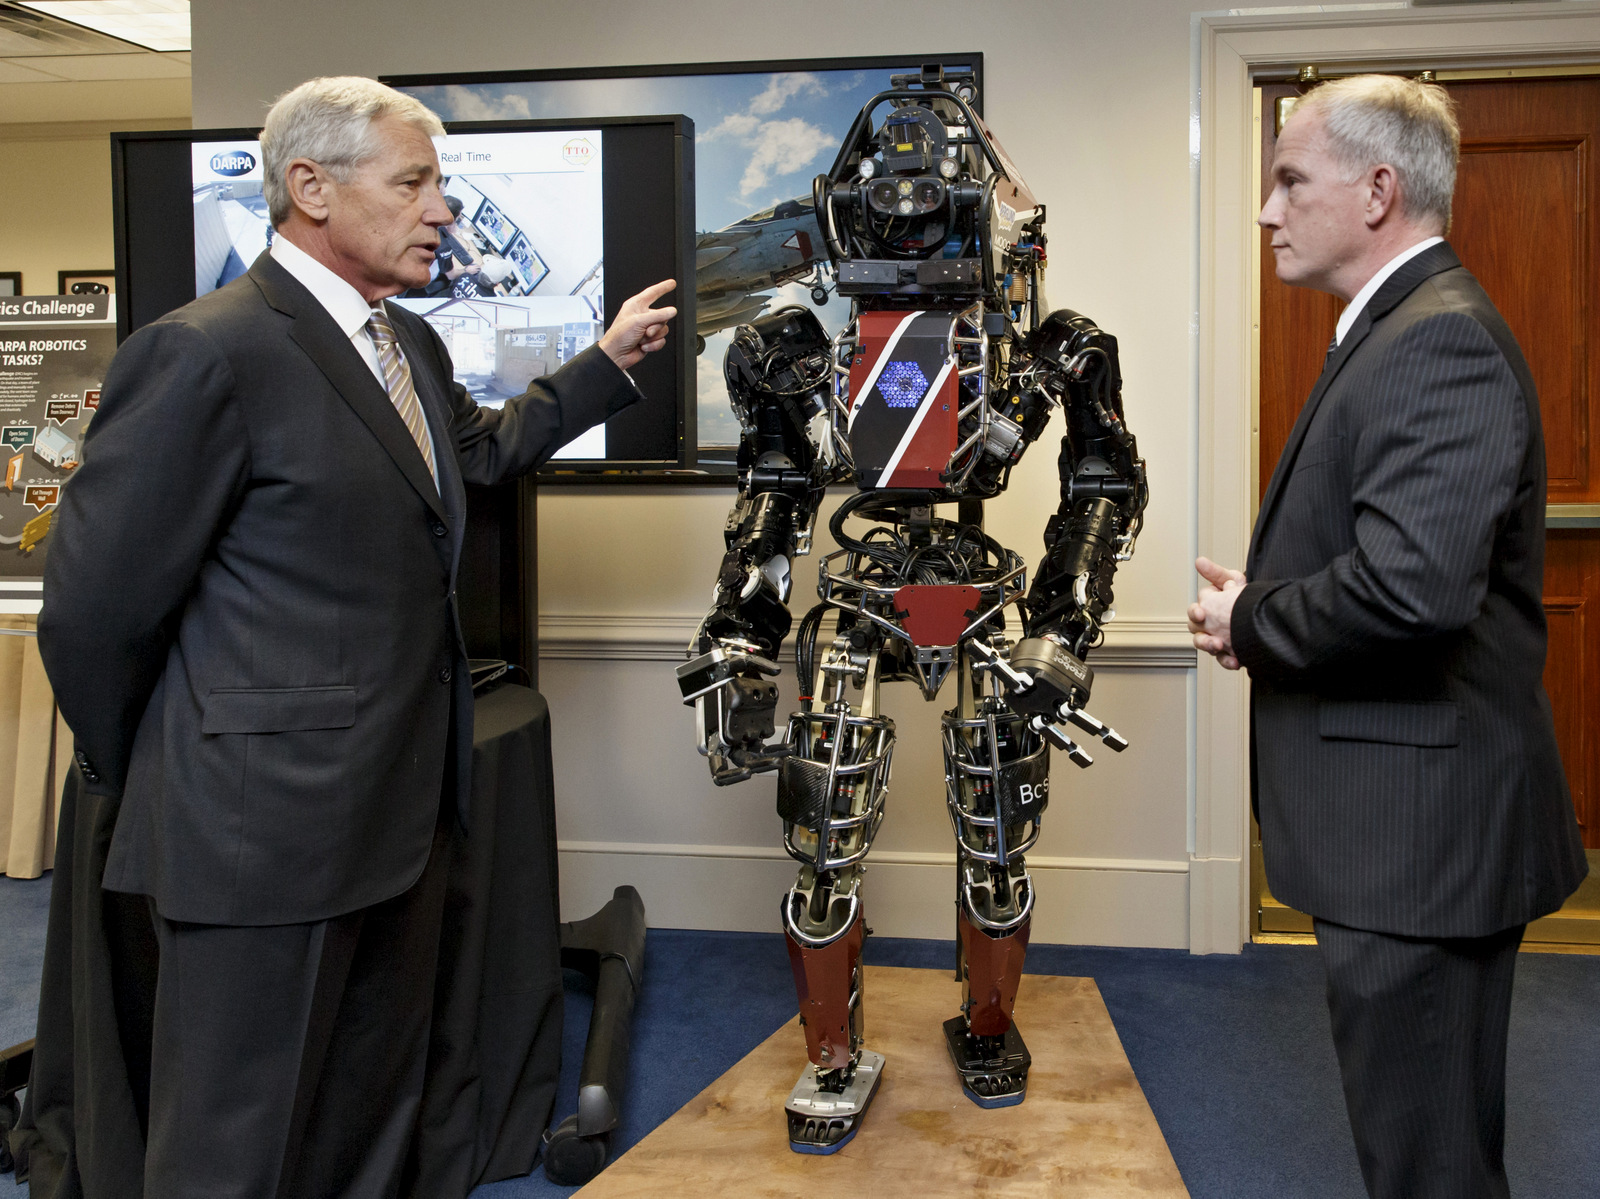 Then Defense Secretary Chuck Hagel inspects the latest high-tech projects being by the Defense Advanced Research Projects Agency, DARPA, April 22, 2014, at the Pentagon. (AP/J. Scott Applewhite)